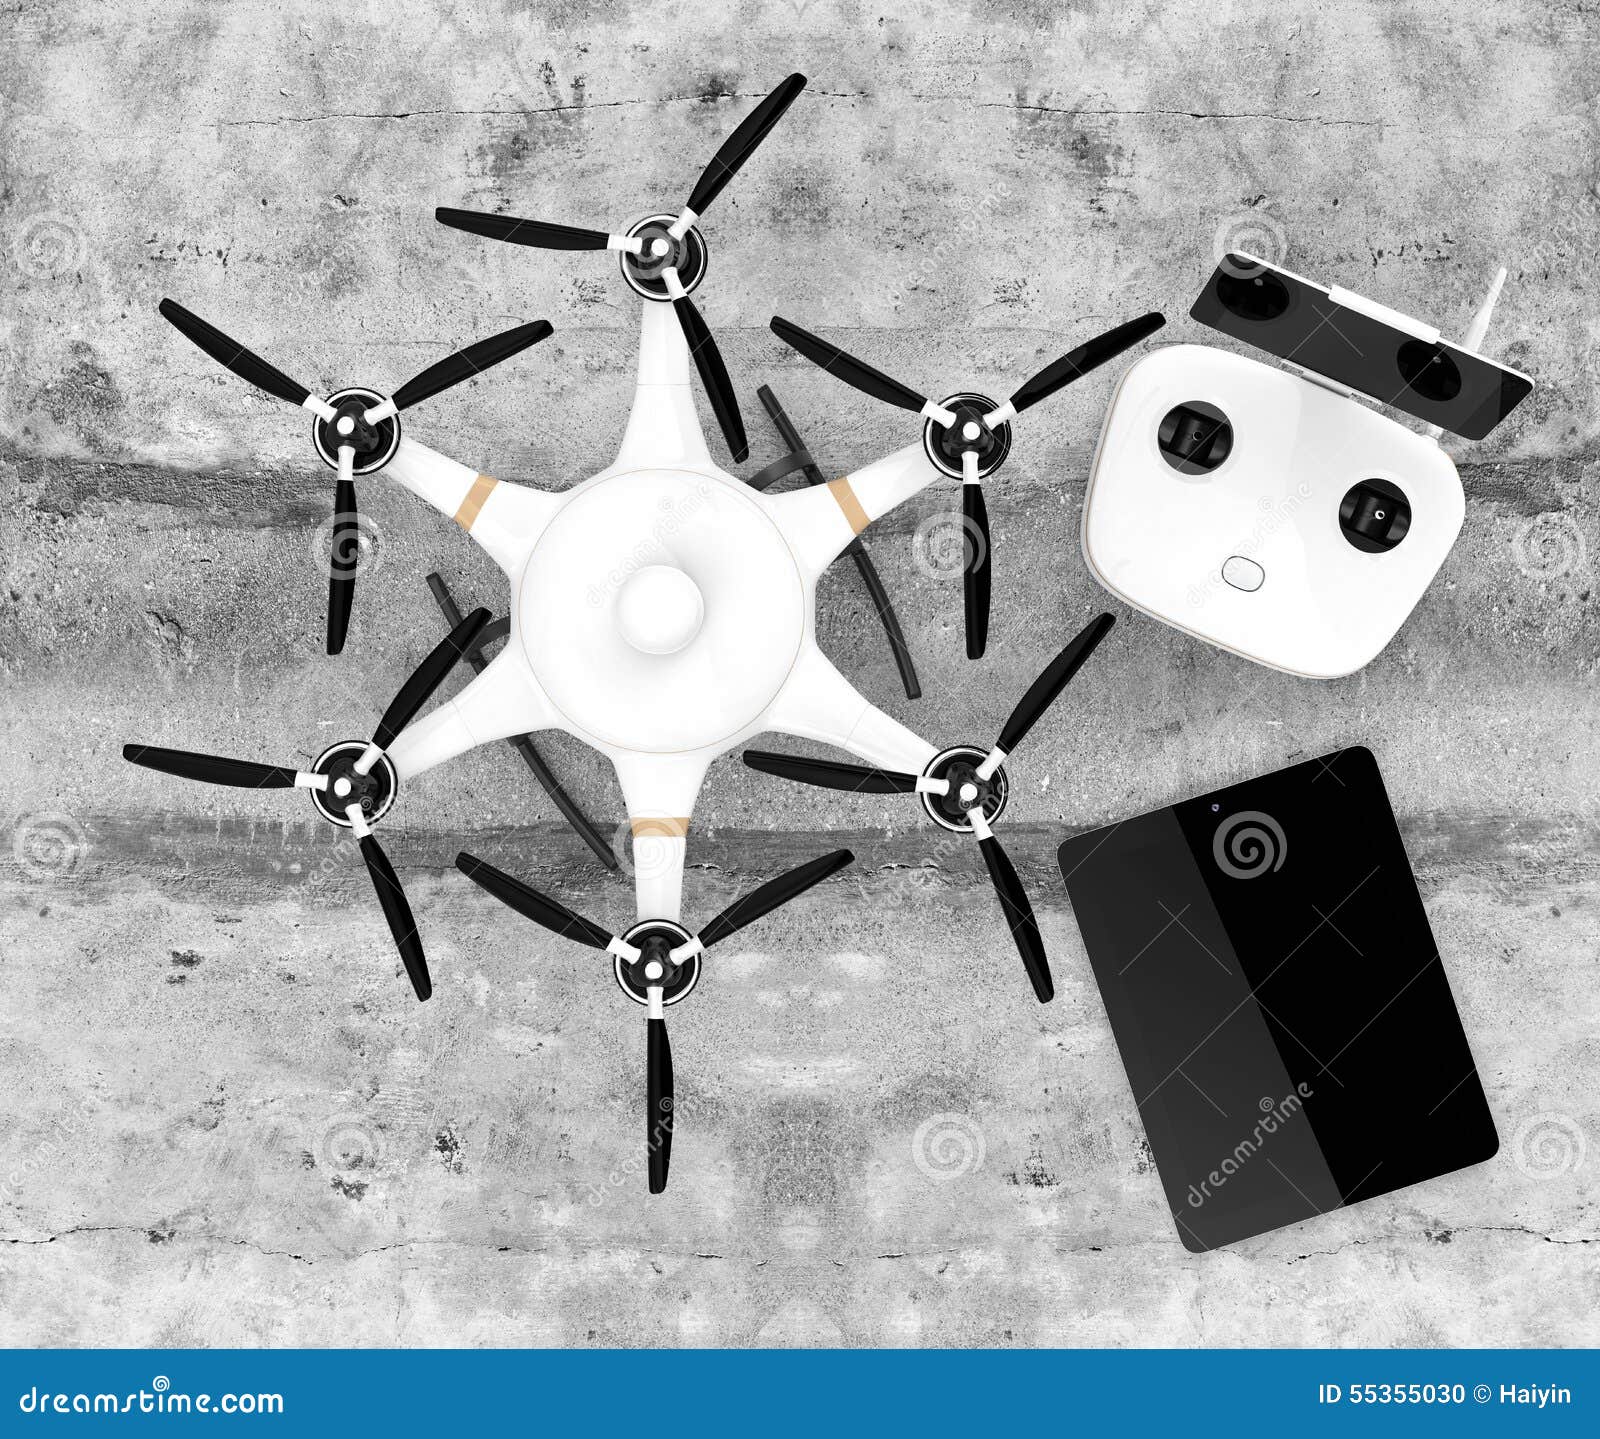 top view of hexacopter, remote controller and tablet pc.